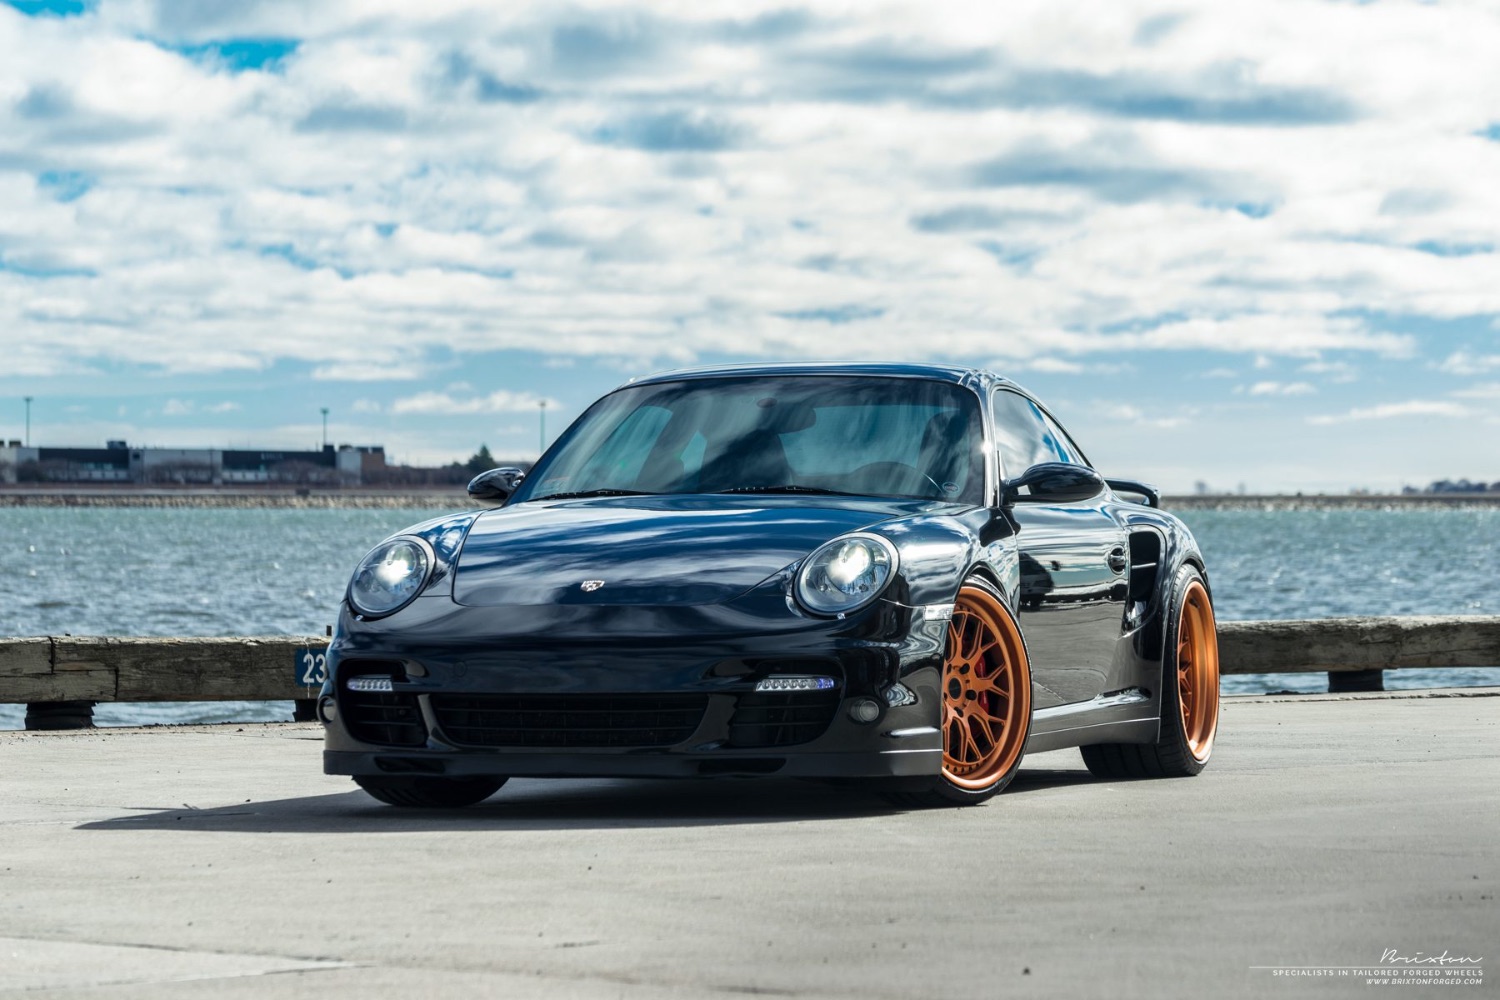 black-porsche-997-turbo-brixton-forged-cm16-circuit-series-forged-wheels-20-inch-rose-gold-concave-3-piece-1800x1200